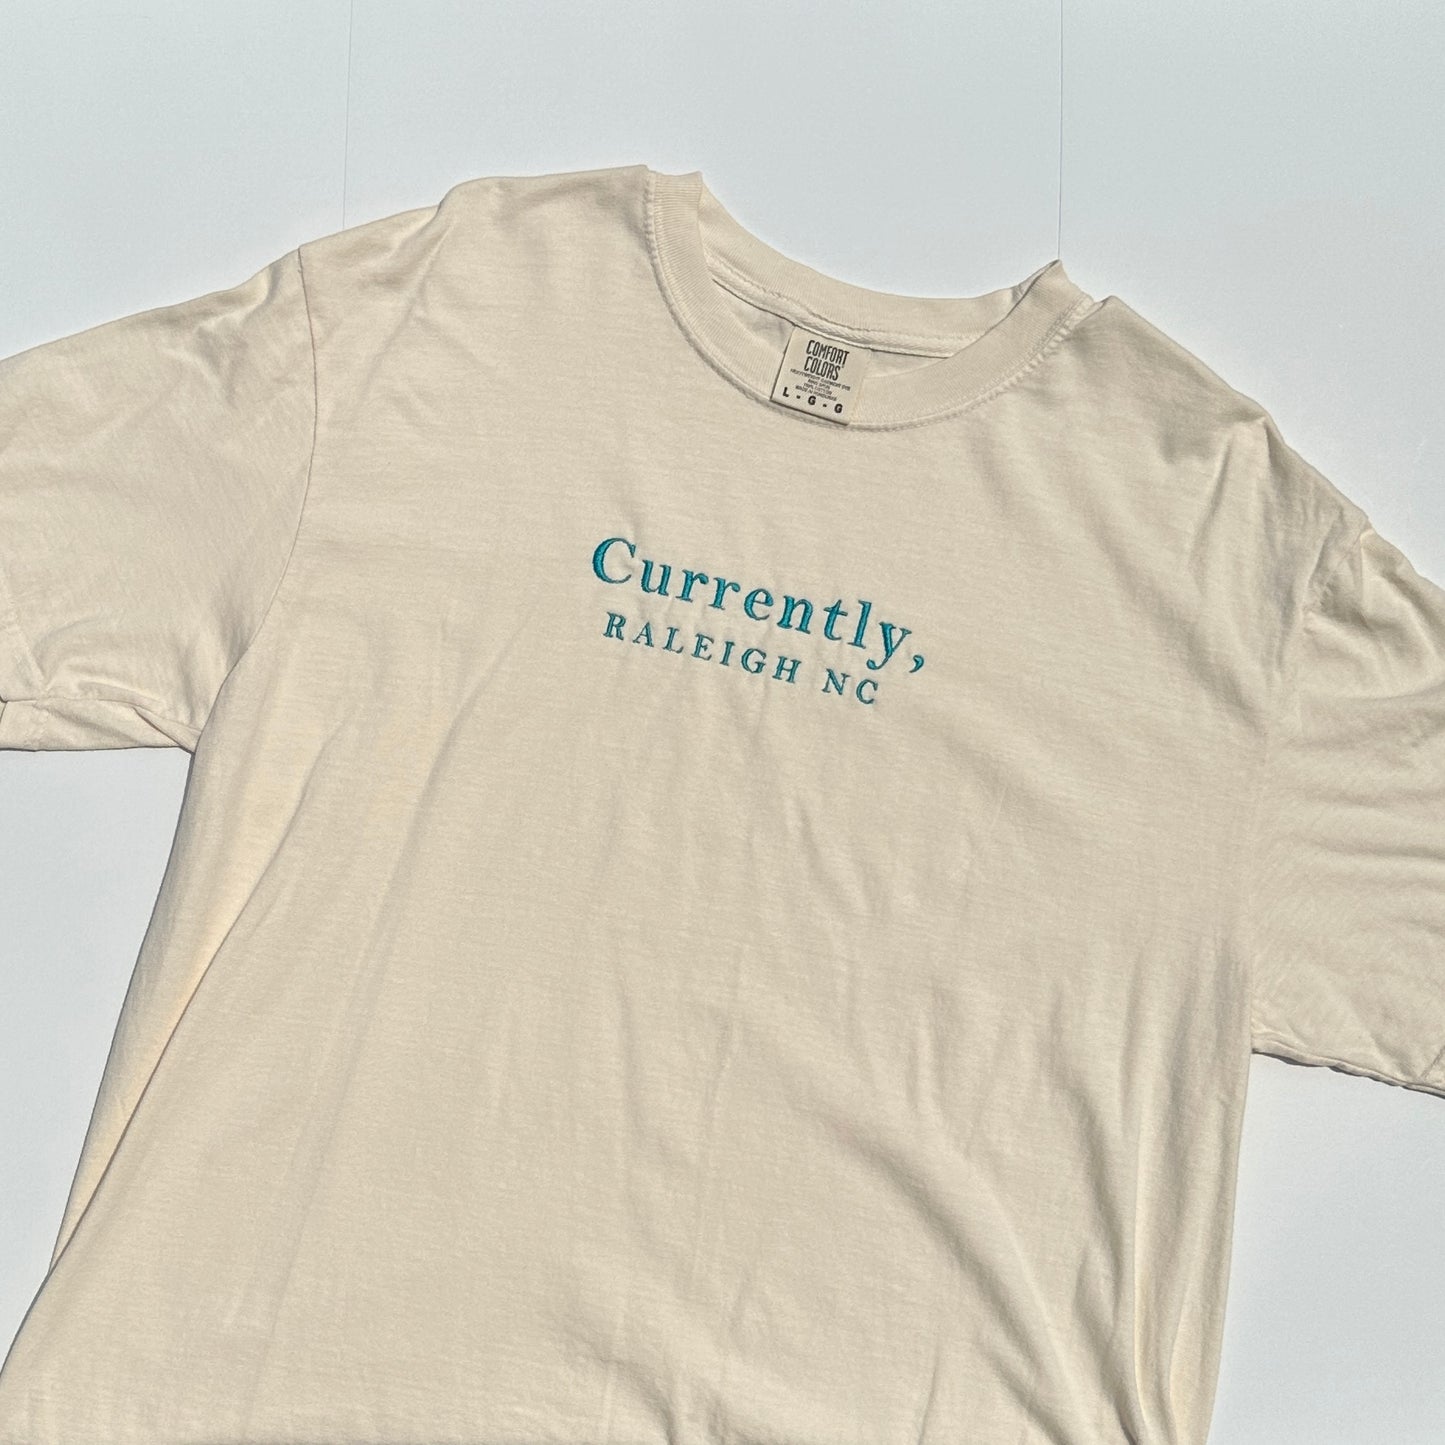 Currently, Cities Embroidered T-shirt